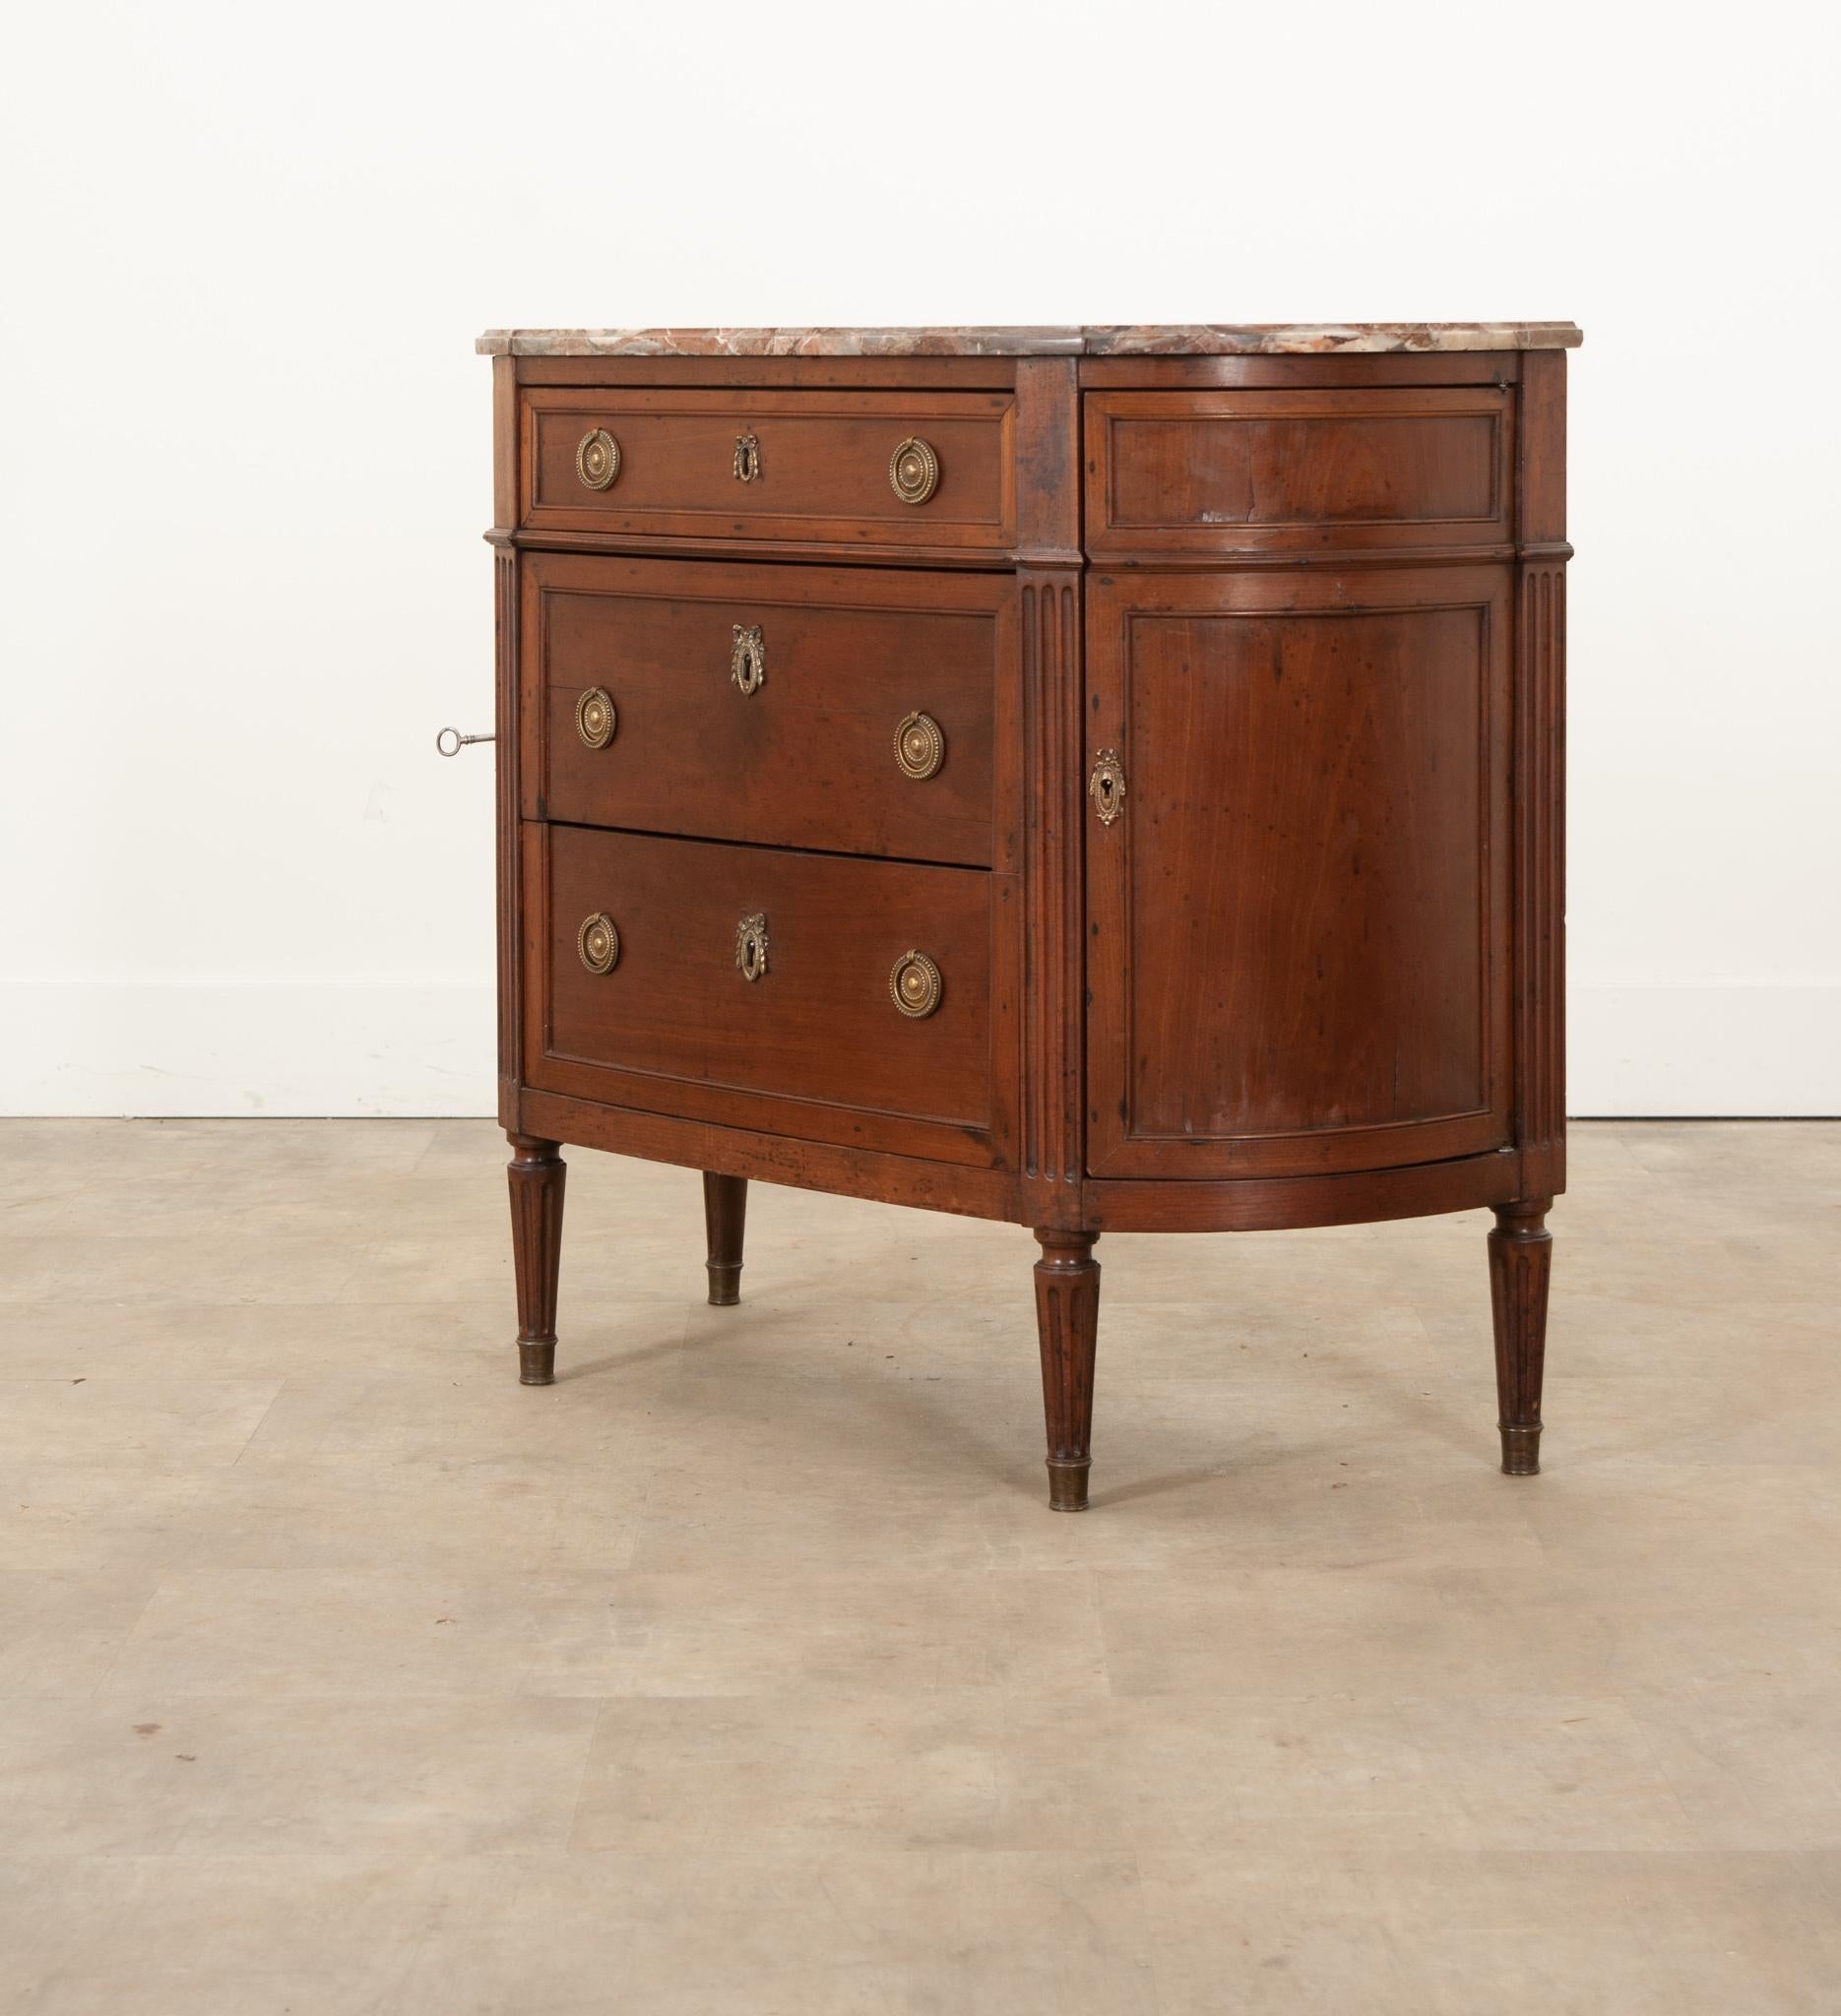 A charming French Louis XVI style commode hand-crafted in France circa 1800. This fabulous mahogany commode / buffet displays a wonderful demilune shape and is topped with its original gorgeous piece of shaped and molded marble in colors of deep